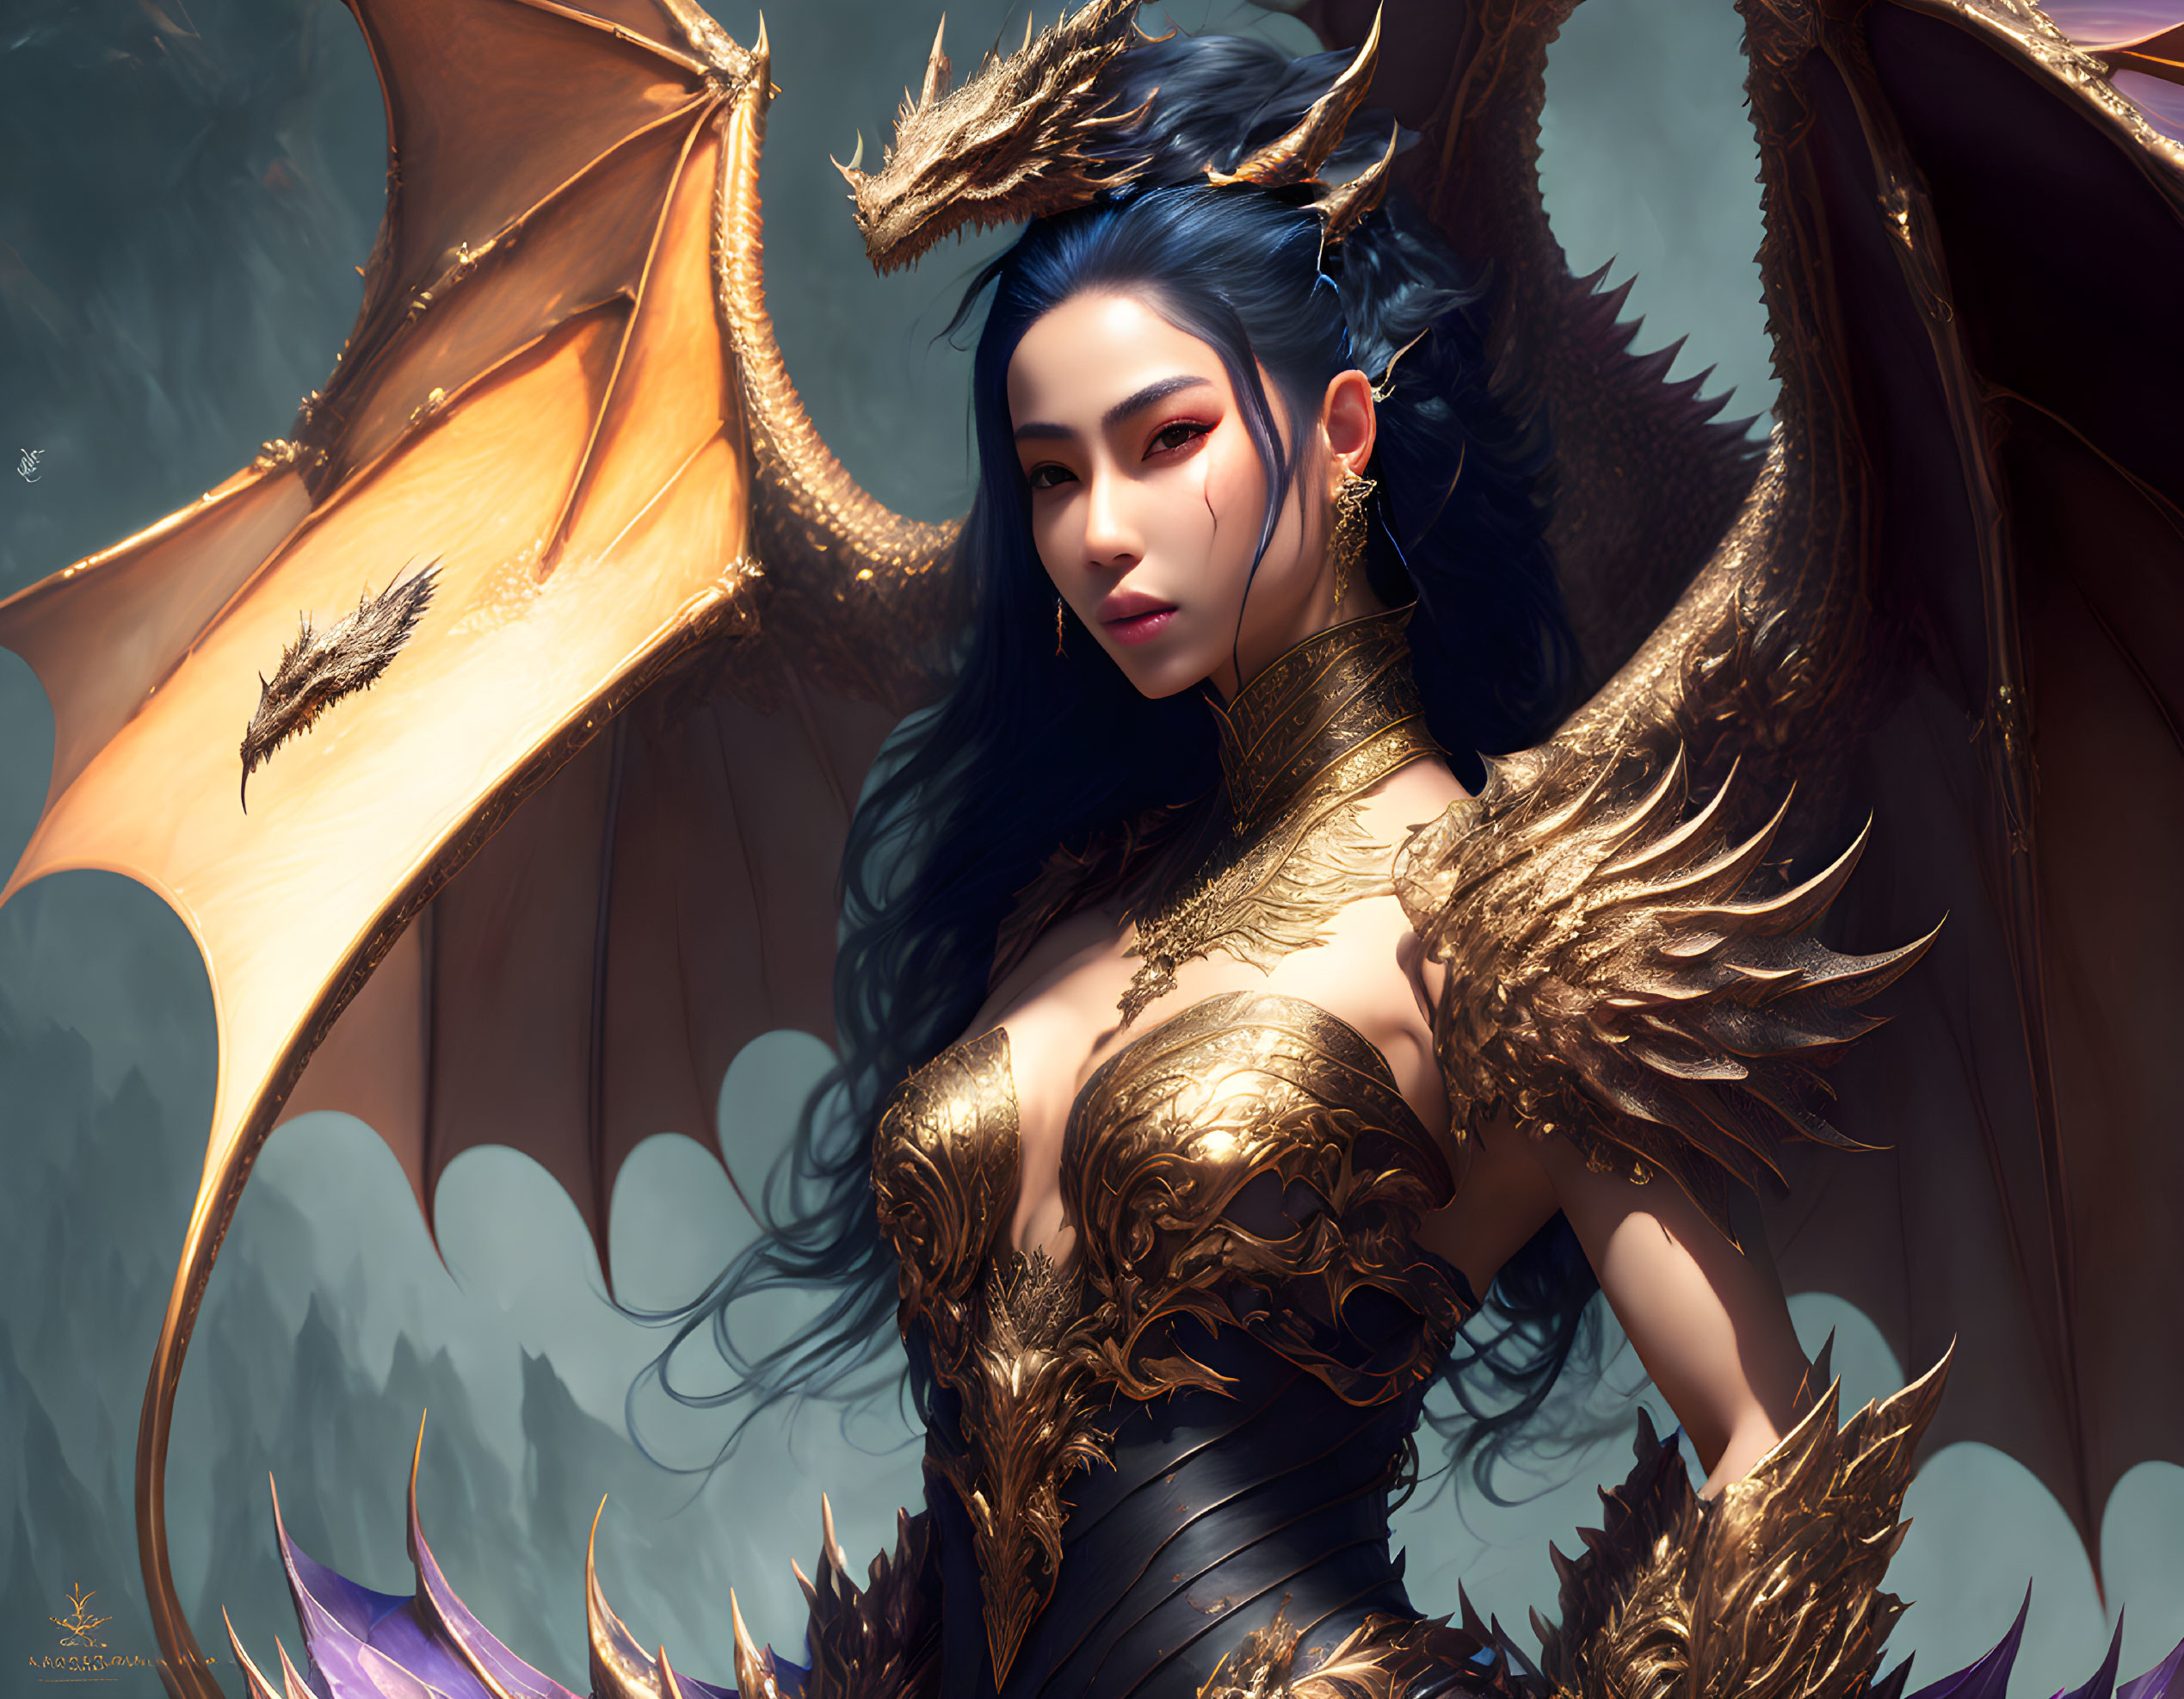 Fantasy illustration of a woman in dragon armor with golden accents, wings, and horned crown against